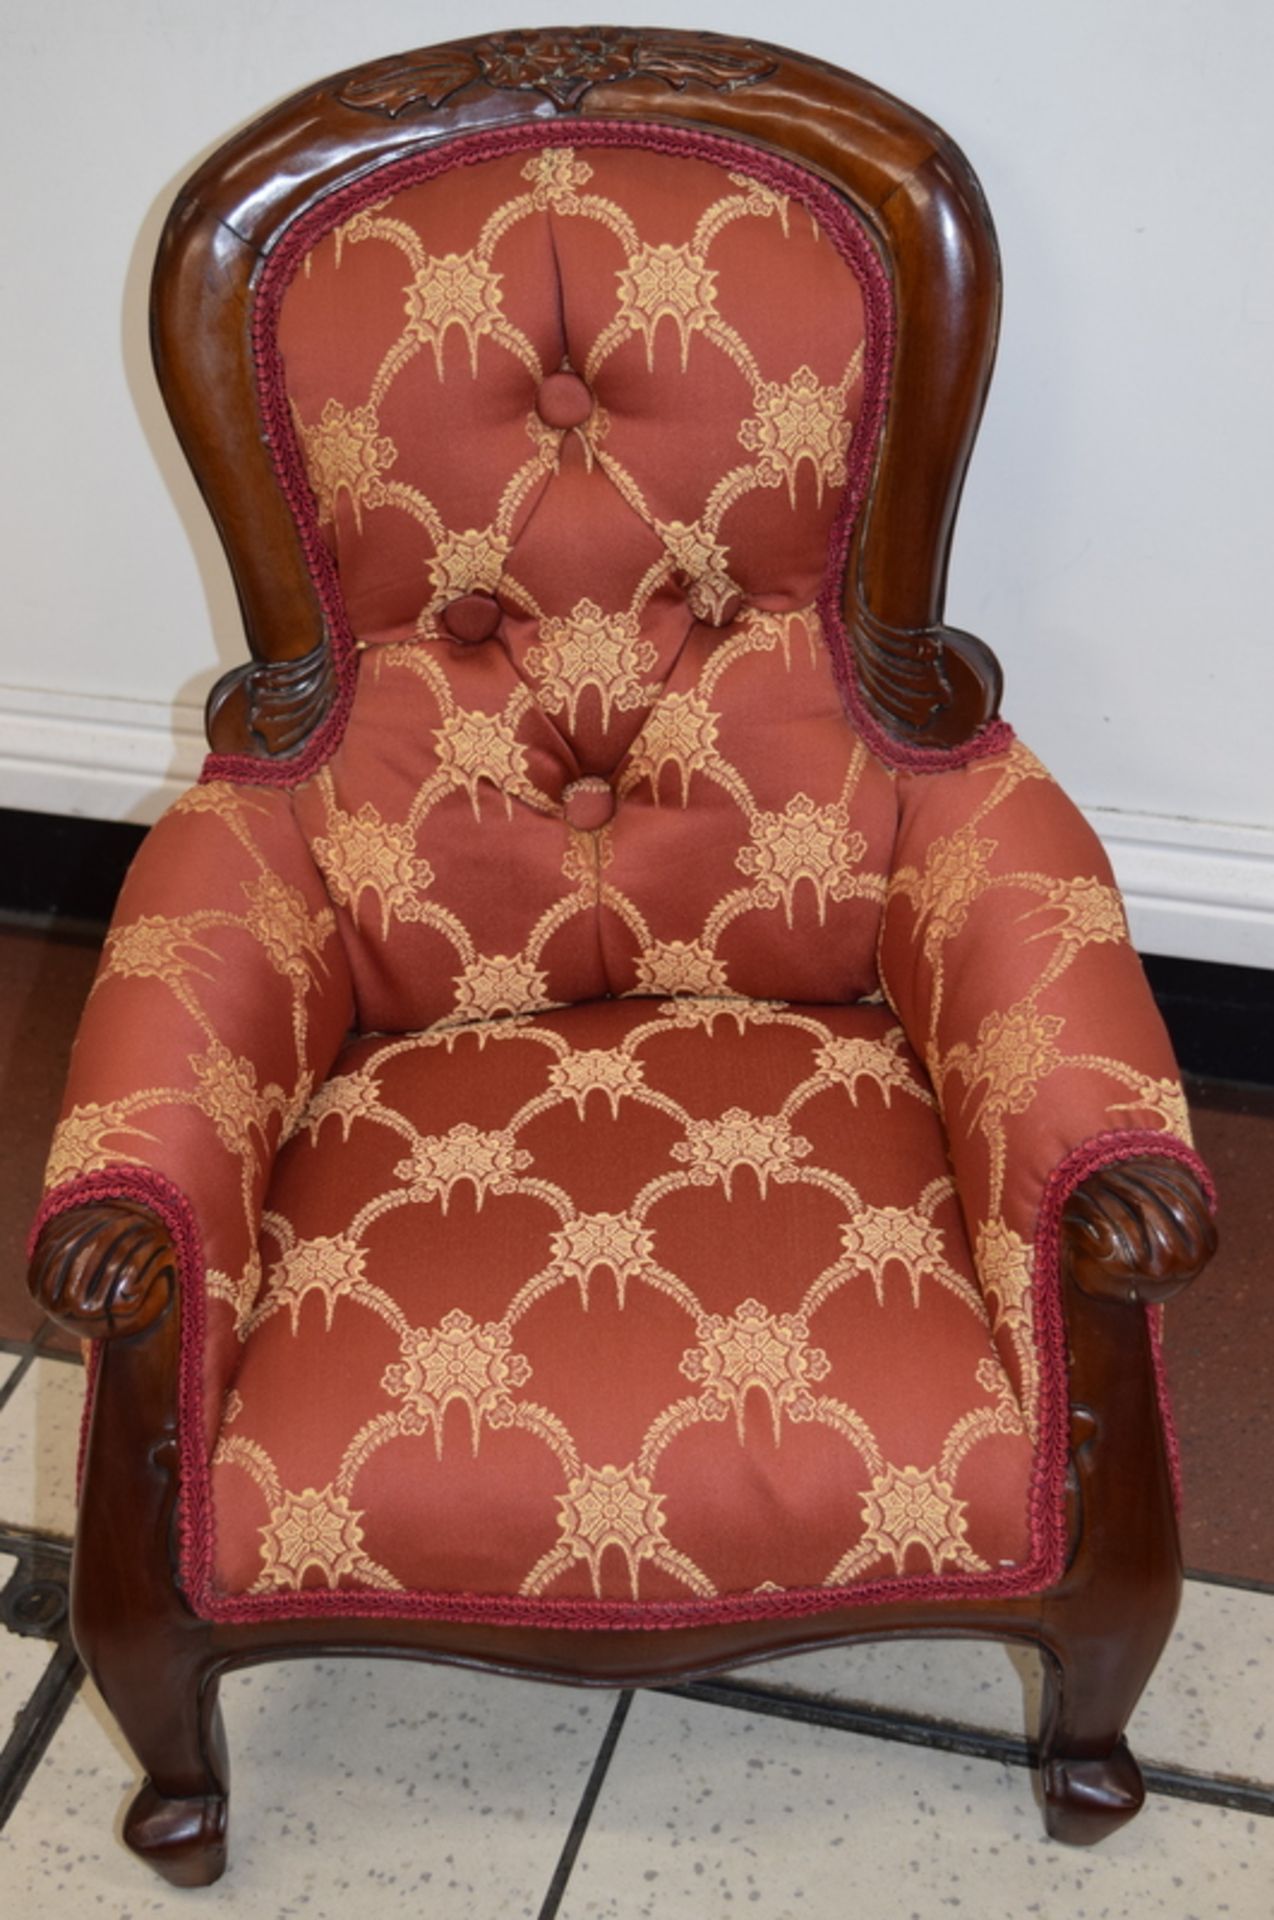 Child's Chesterfield Button-back chair In lovely condition - Image 3 of 4